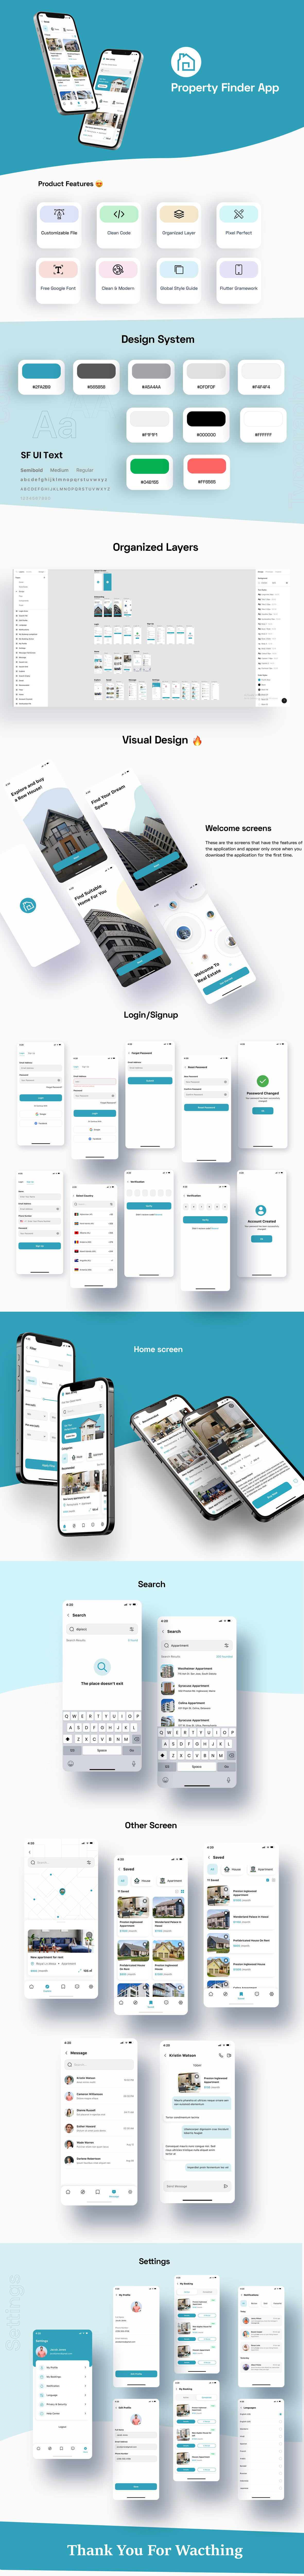 Property Finder : Rent & Sale Flutter 3.x (Android, iOS) app UI template | Property for Rent & Buy - 7